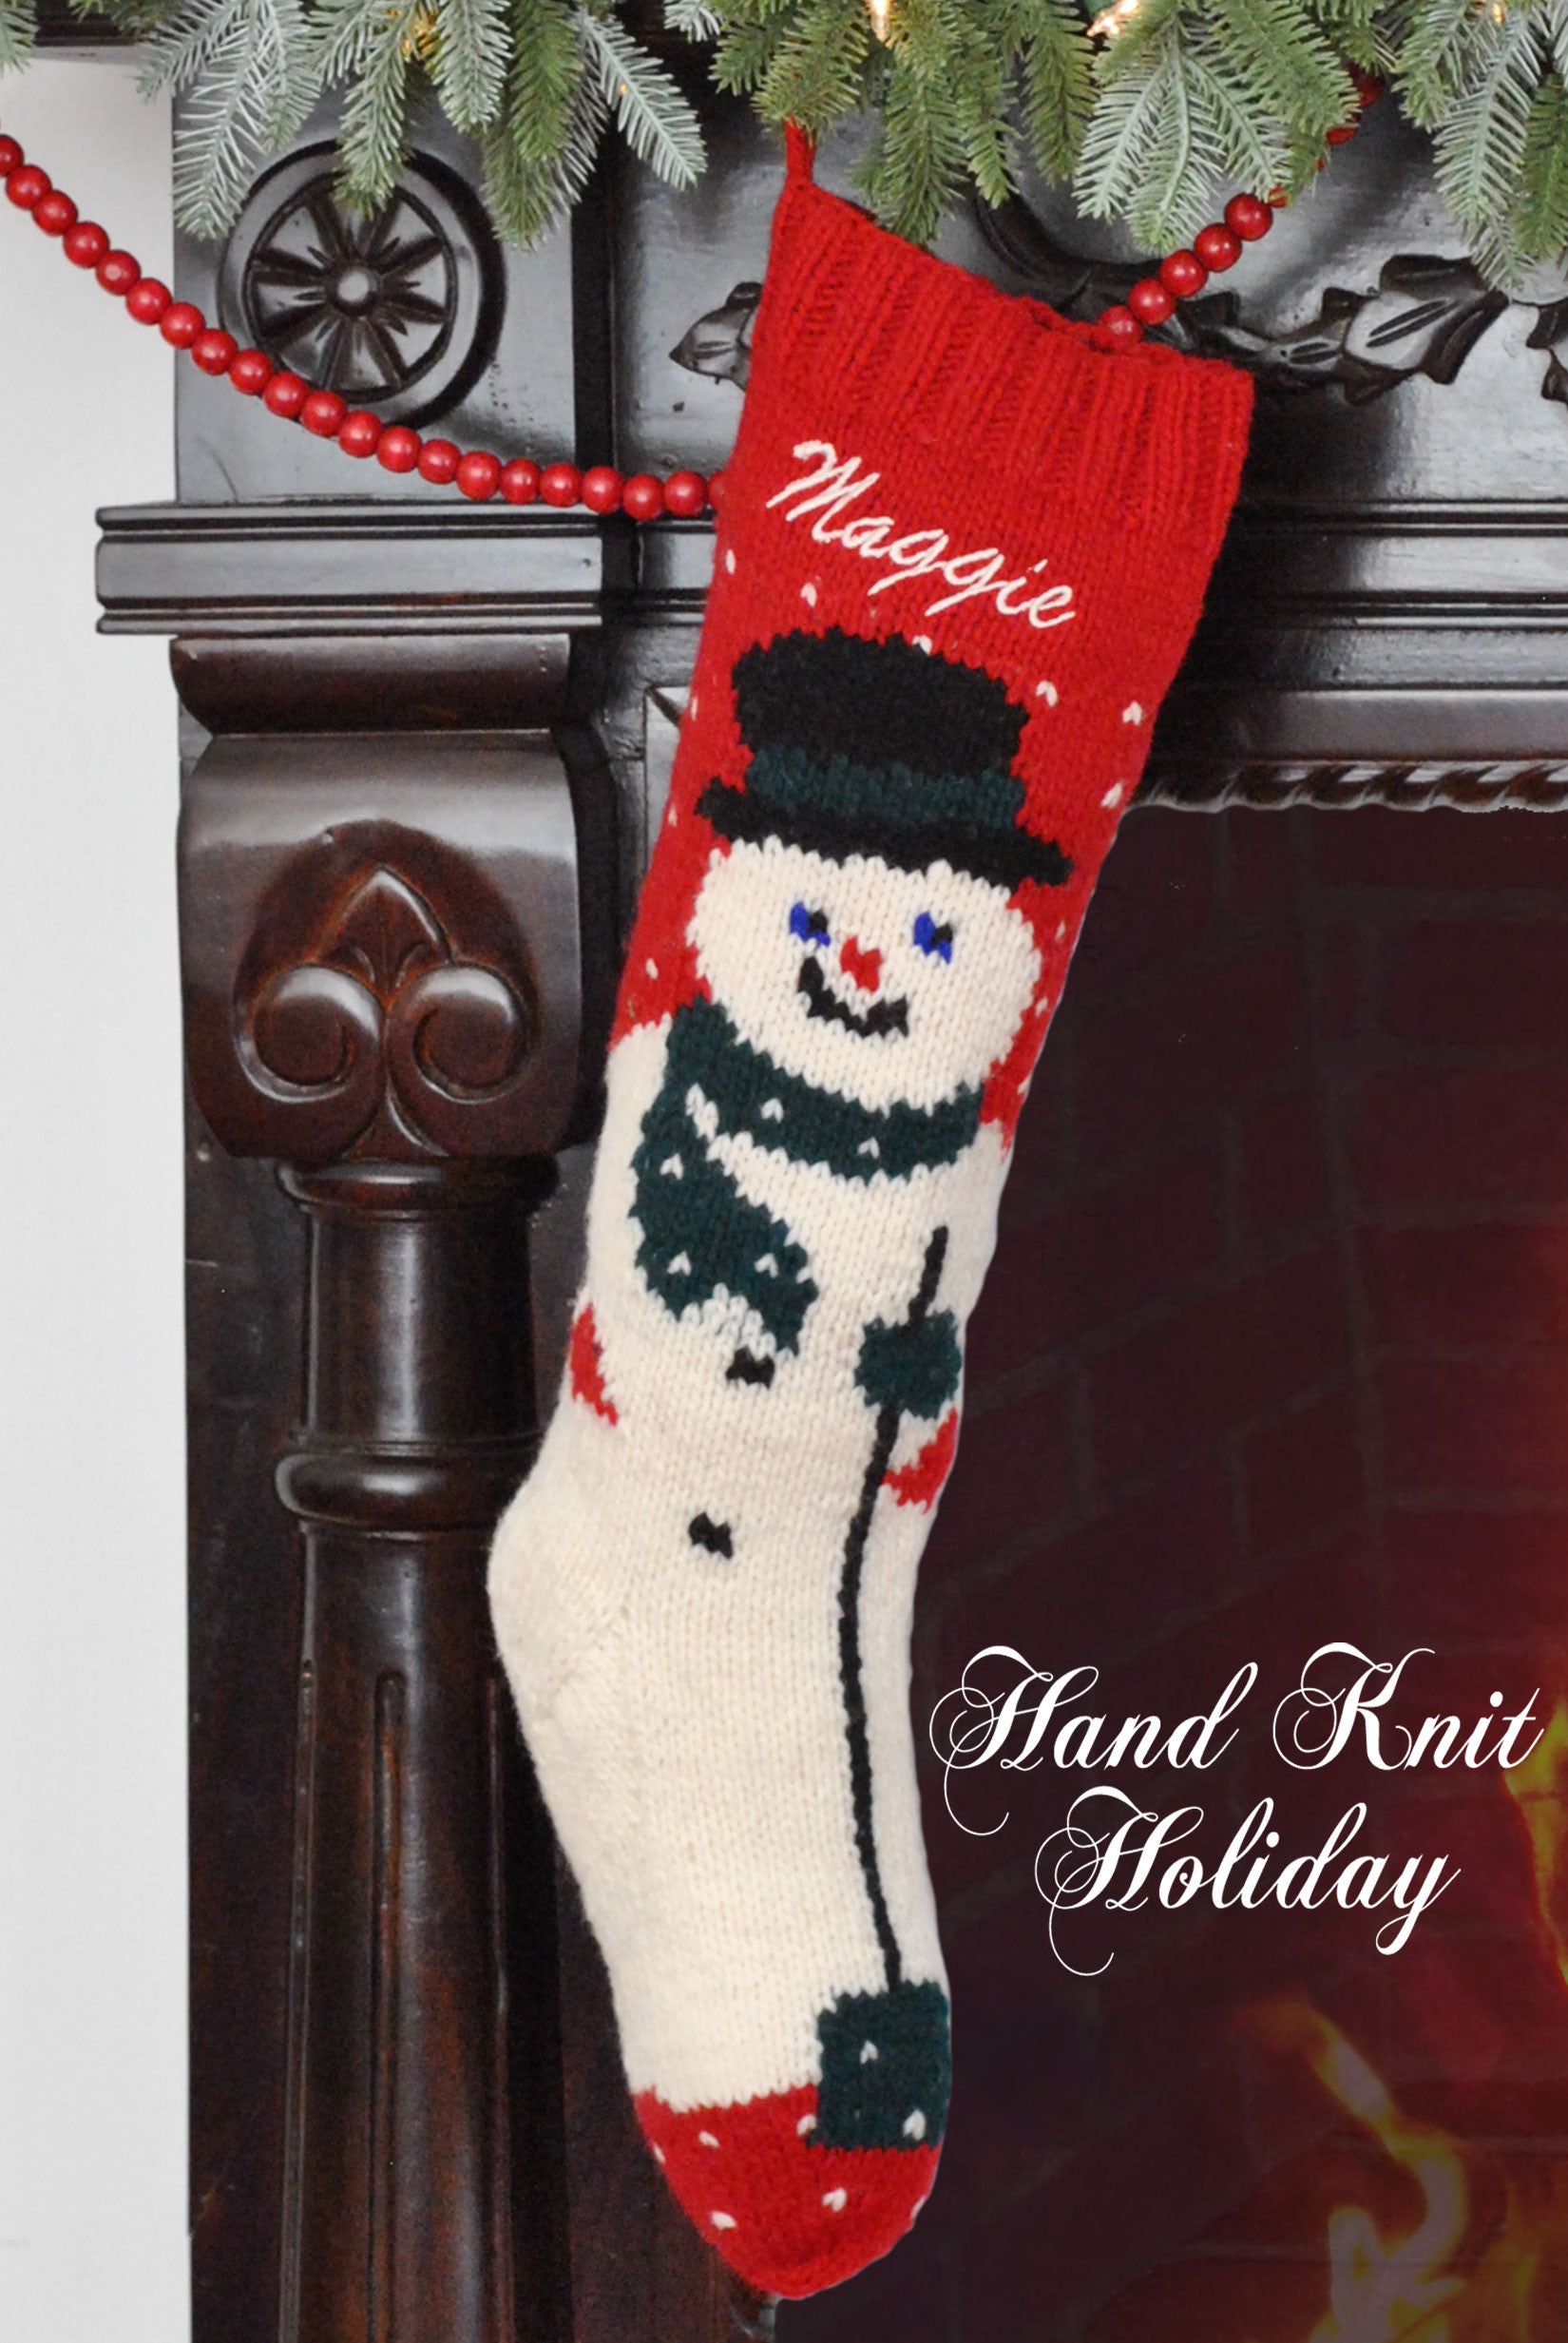 Personalized Wool Snowman Christmas Stocking